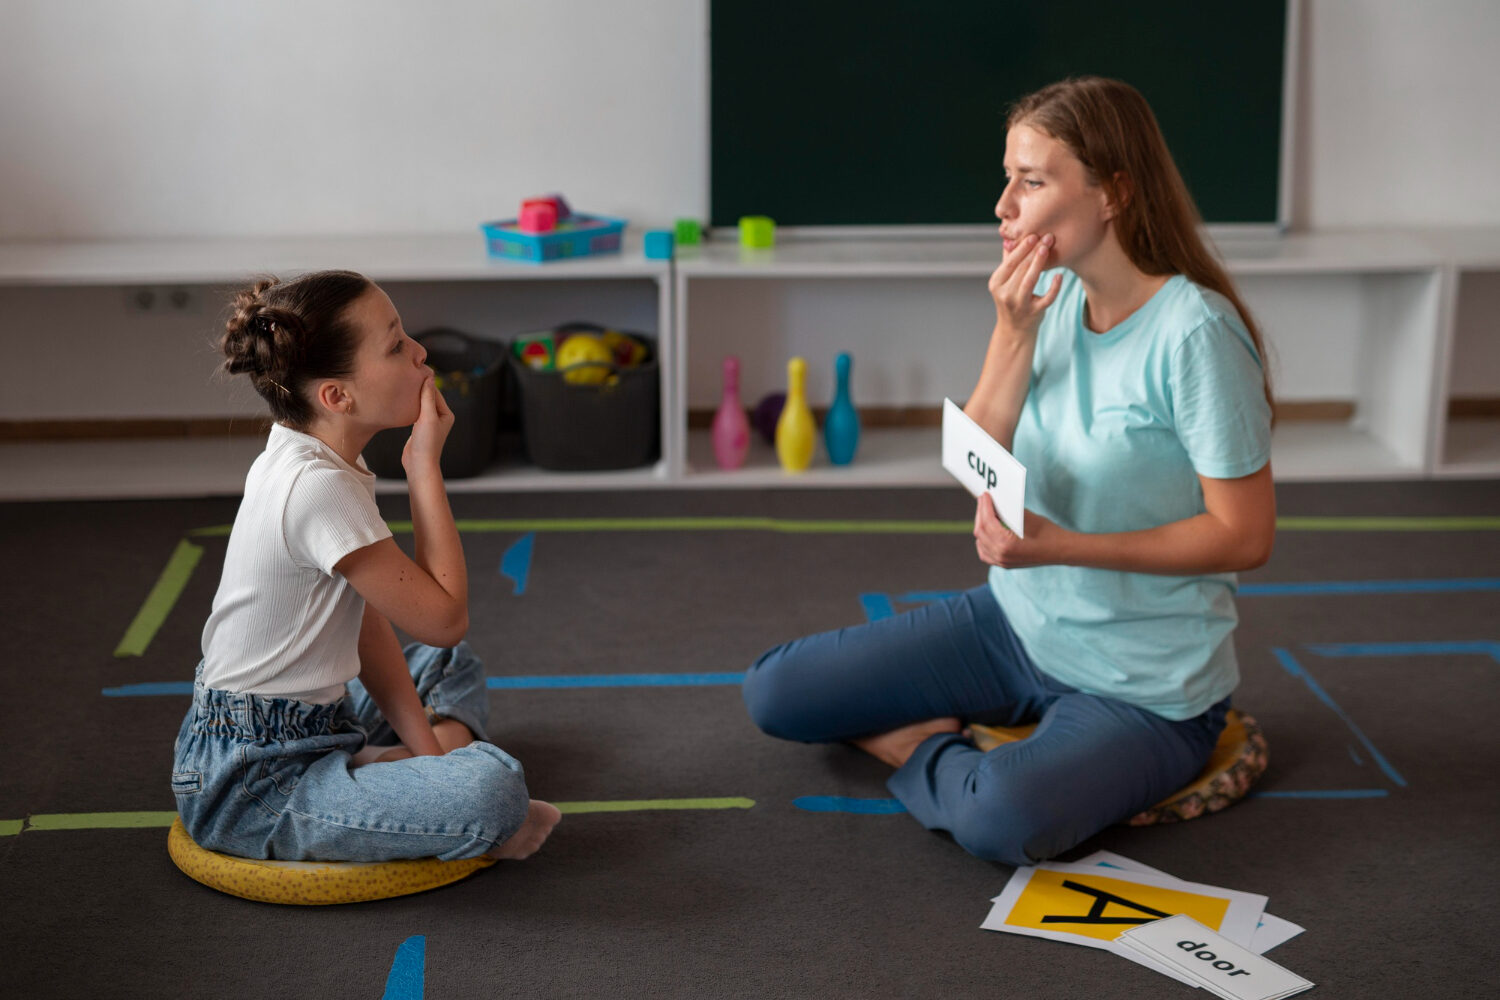 Speech therapy in healthcare for language development.